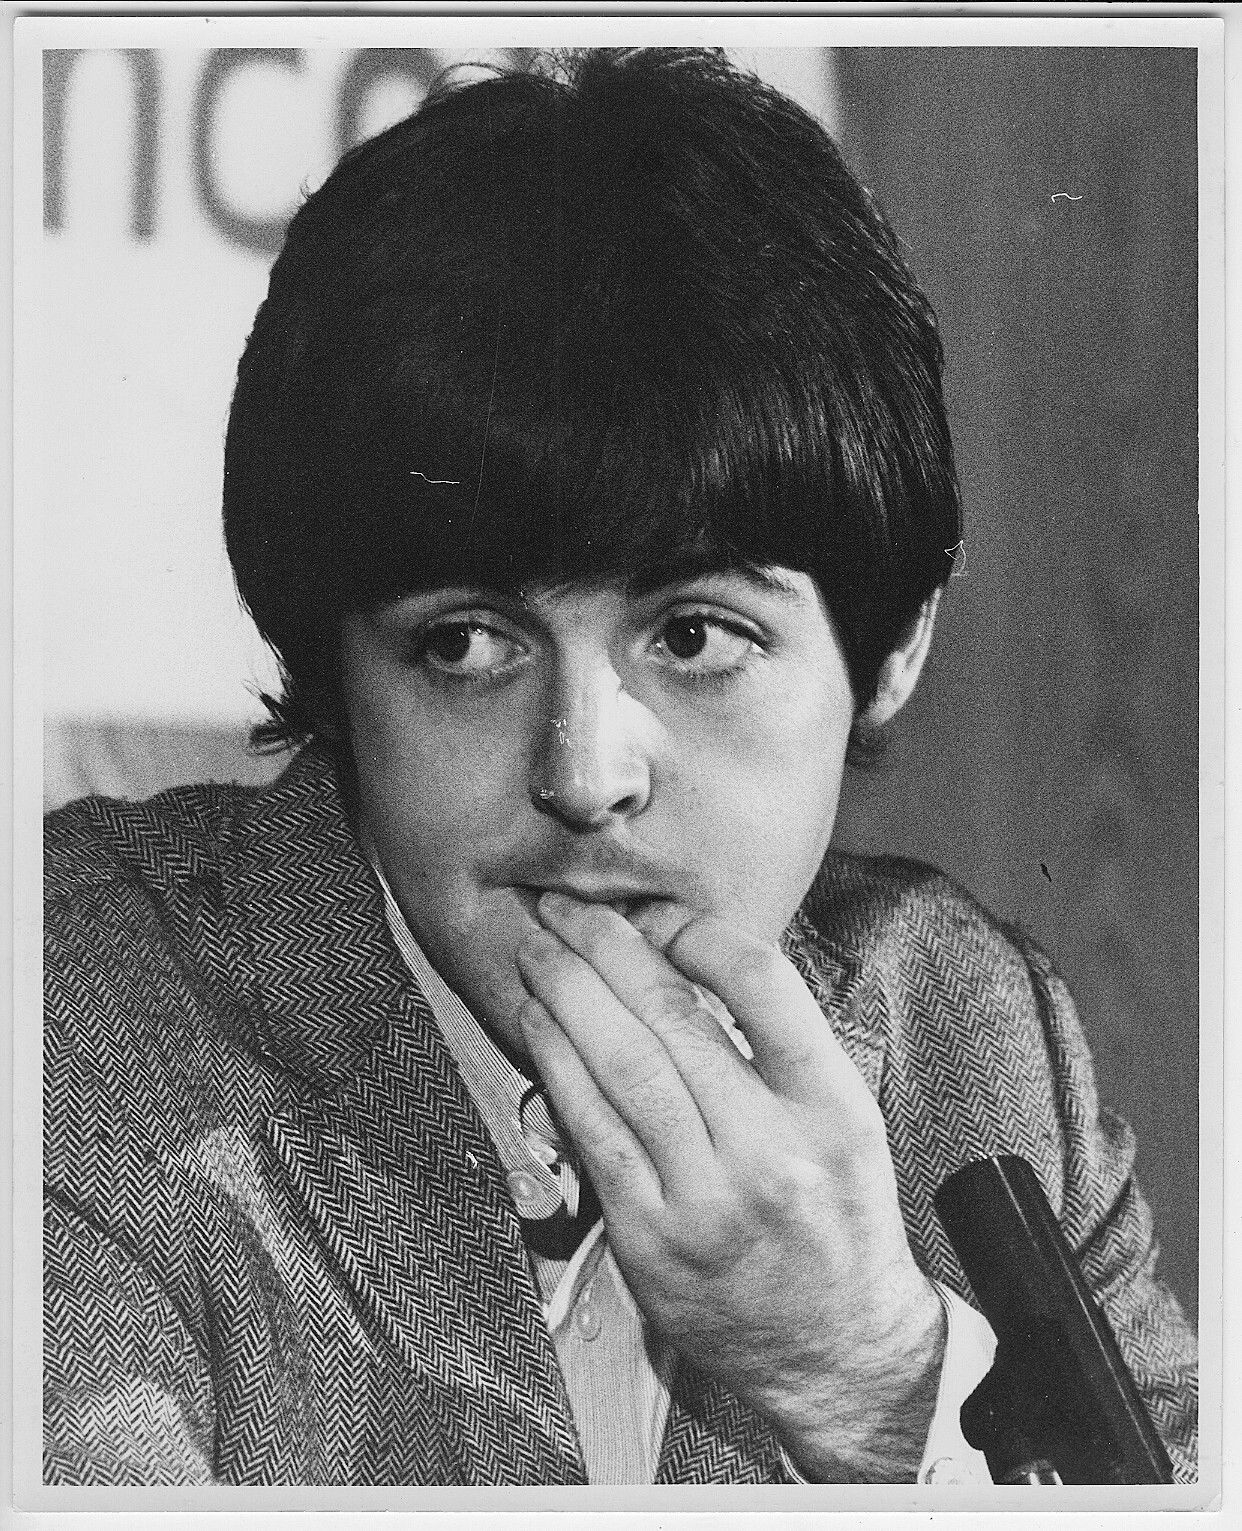 Pin by Kristy In the Sky on Paul McCartney | Beatles pictures, Paul ...